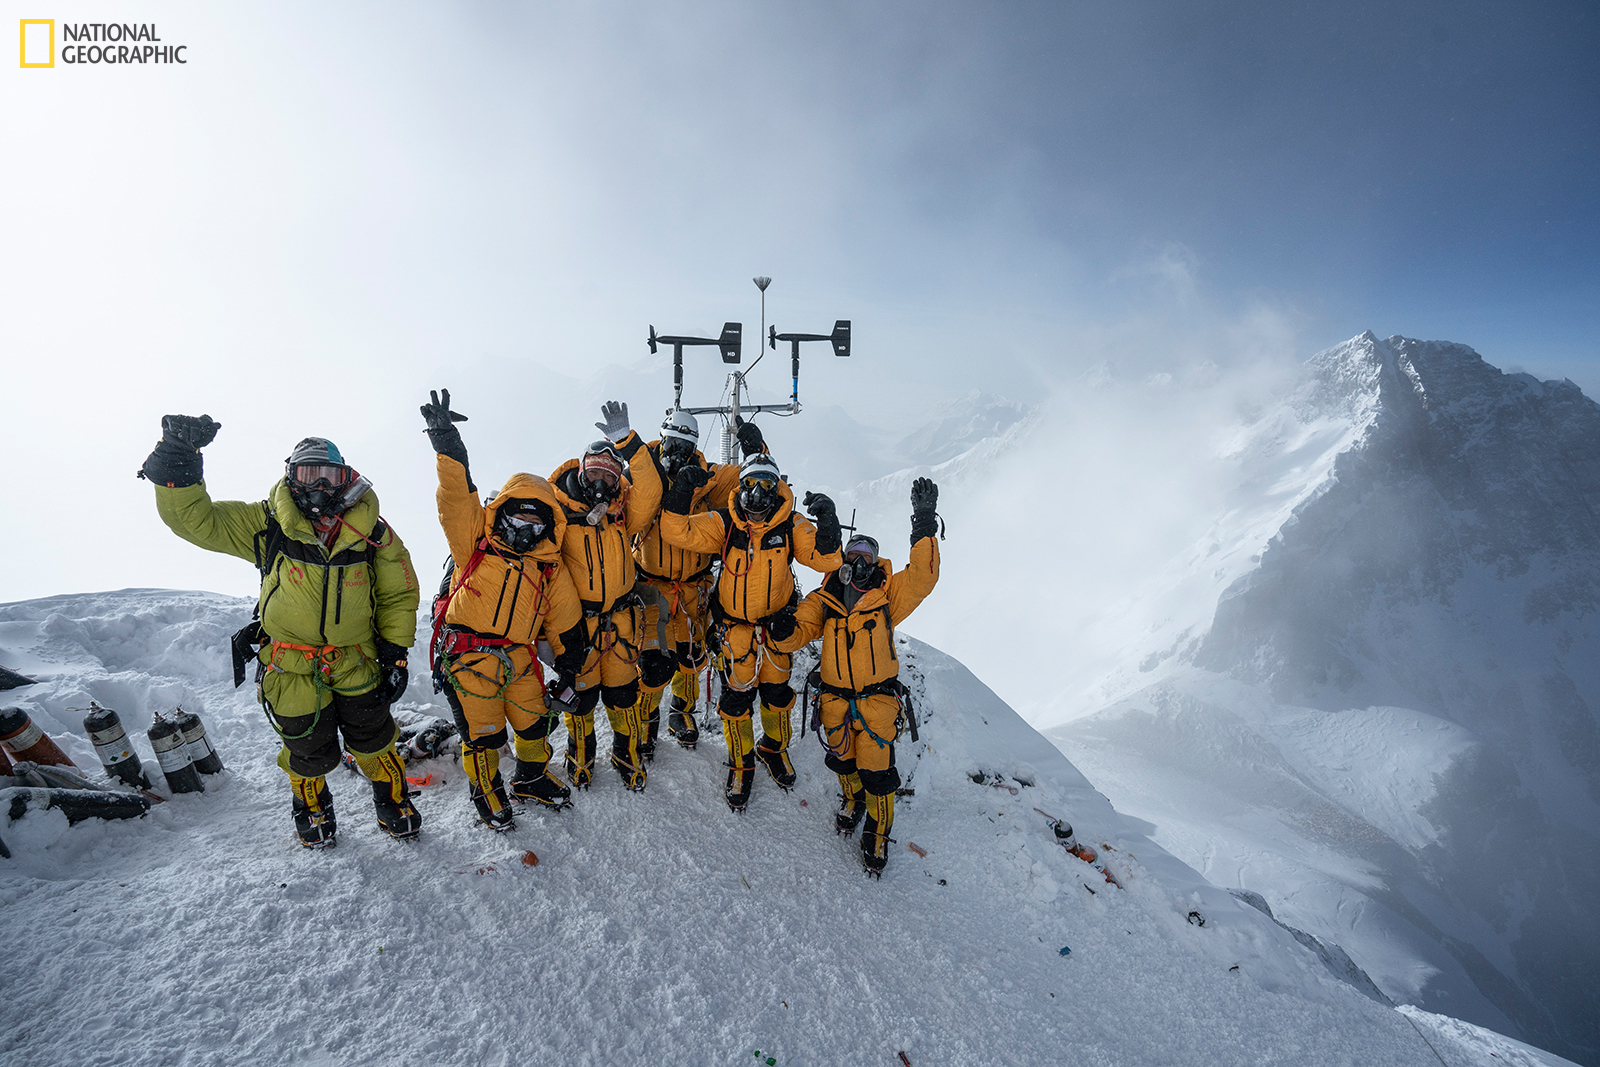 https://today.appstate.edu/_images/_posts/2019/06/expedition-team.jpg